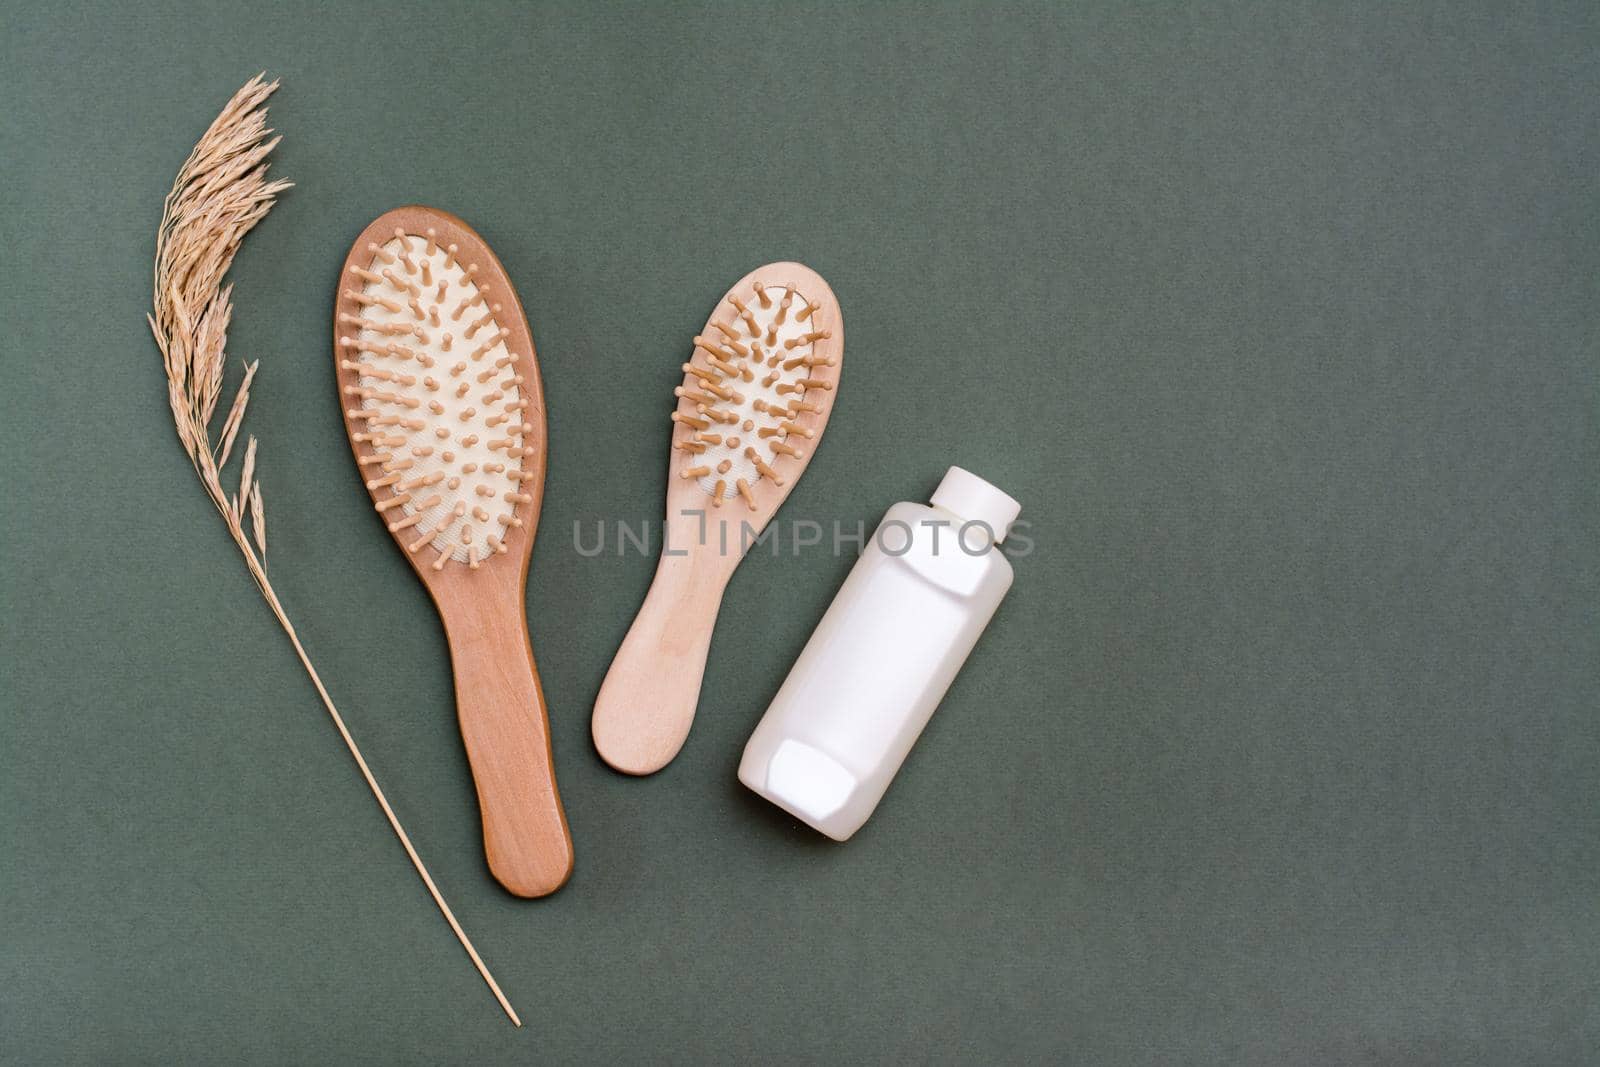 Hair care. Two wooden combs, a bottle of shampoo and ears of herbs on a green background.